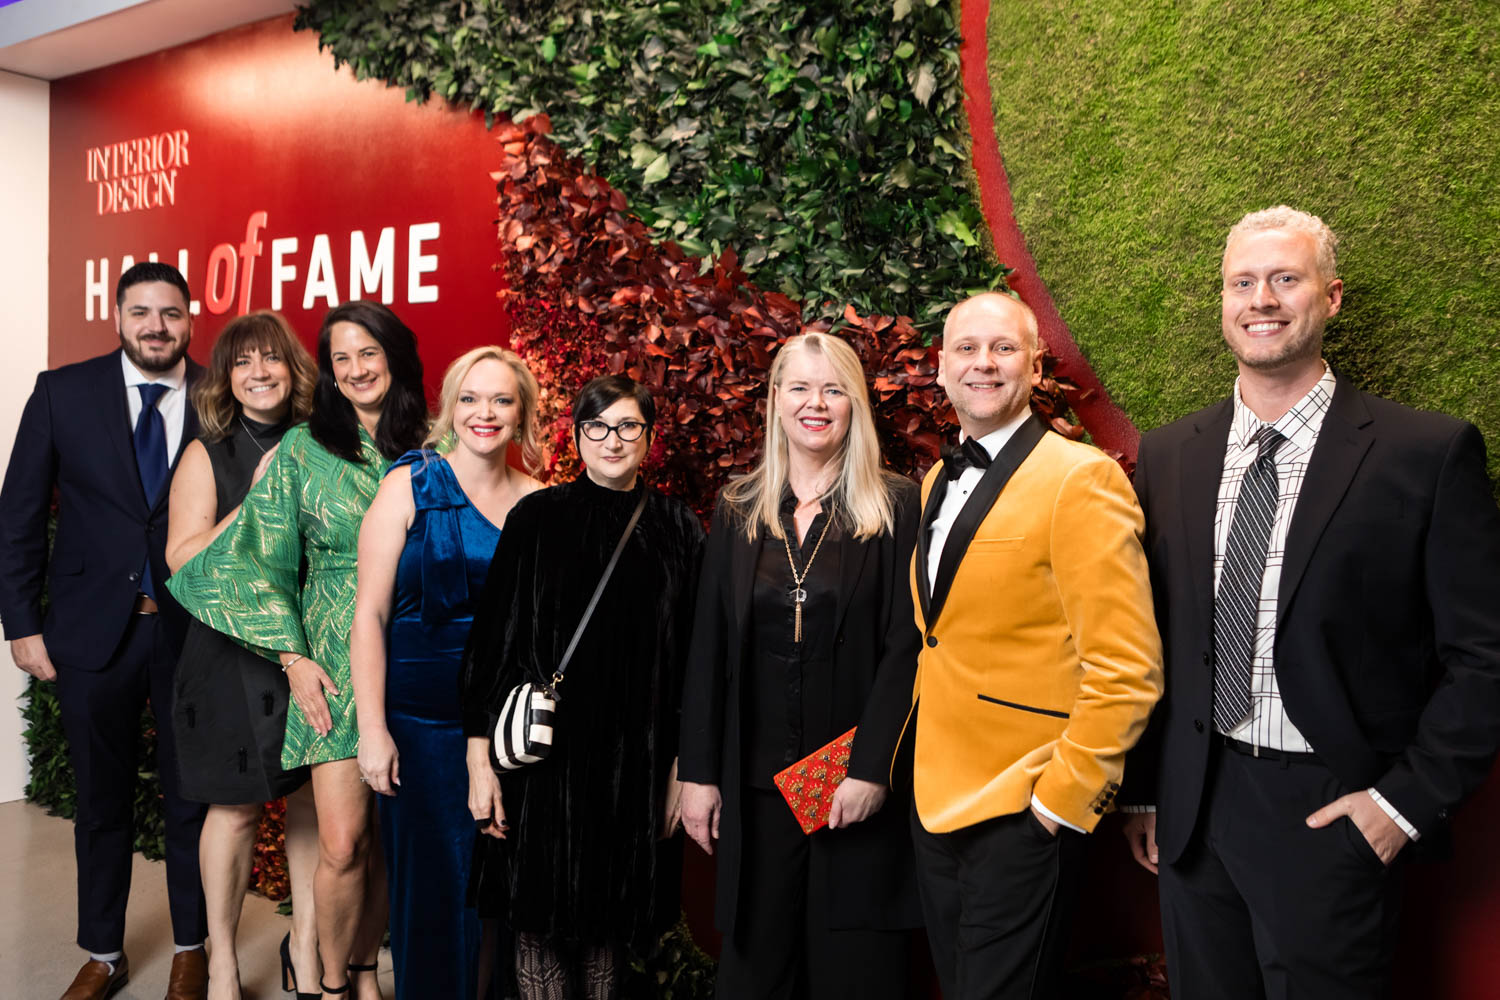 Hall of Fame attendees in front of the Garden on the Wall installation